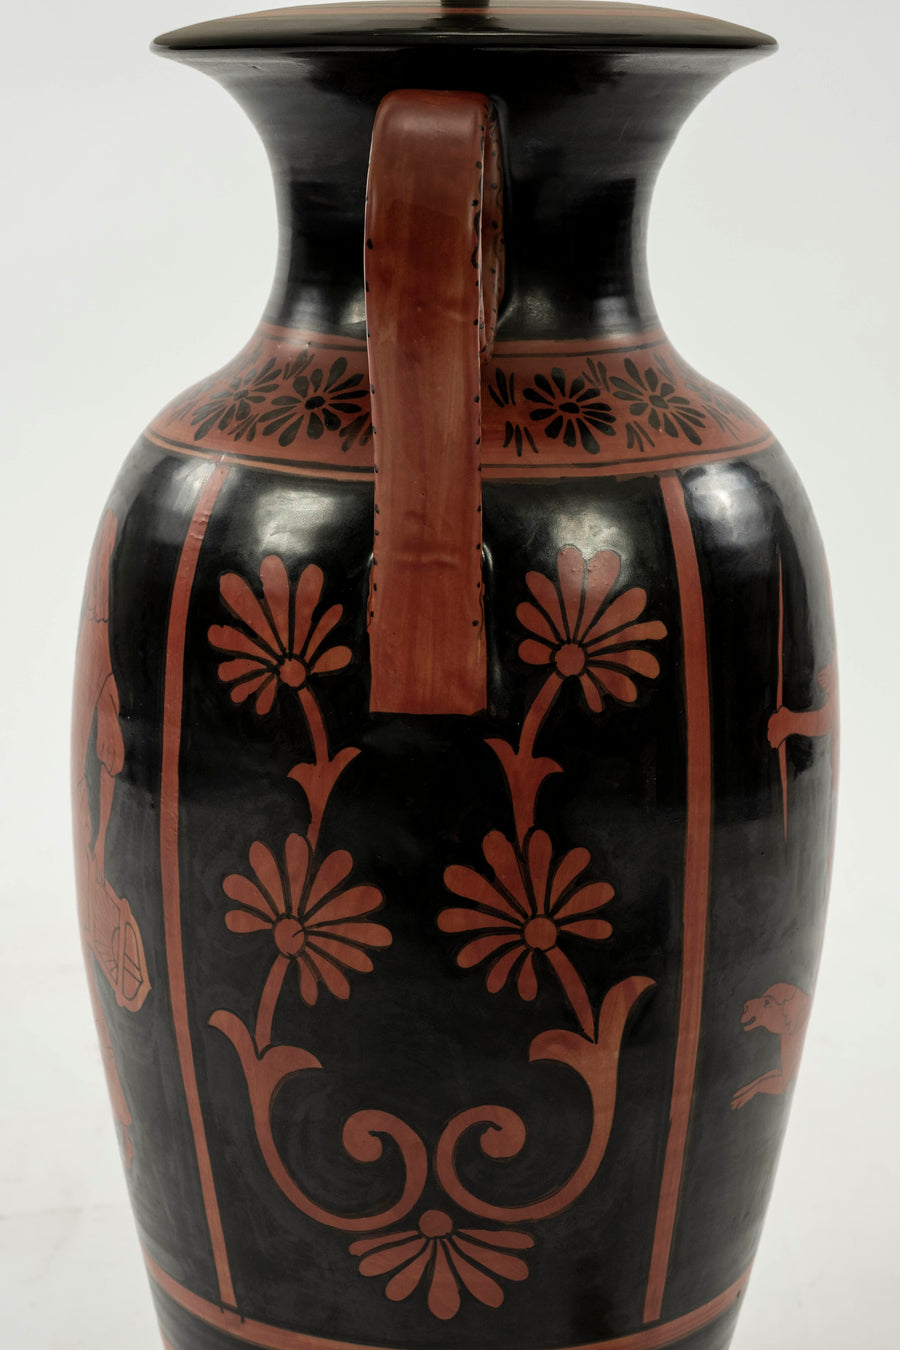 Up-close of the urn lamp's base from the side featuring classic Etruscan-style floral decoration painted in classic red on black.